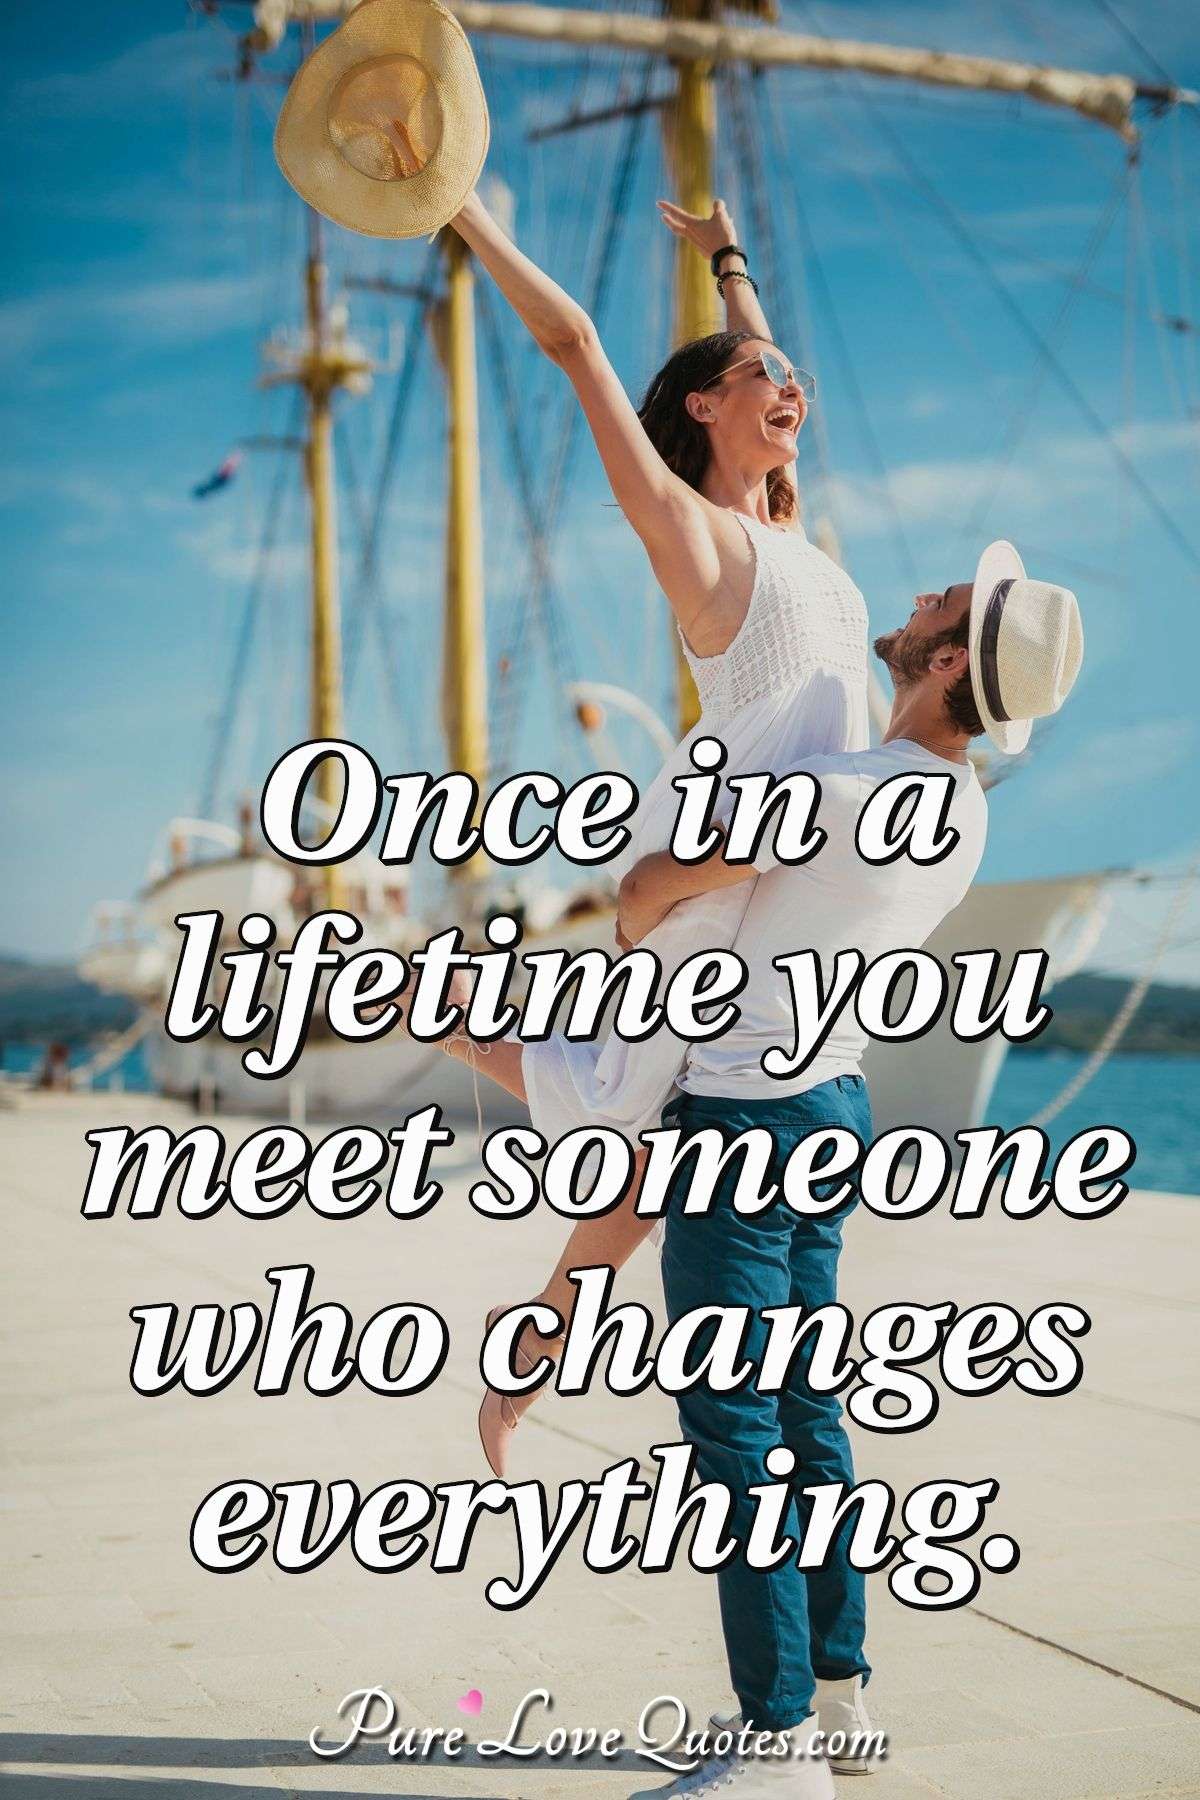 Once in a lifetime you meet someone who changes everything. - Anonymous